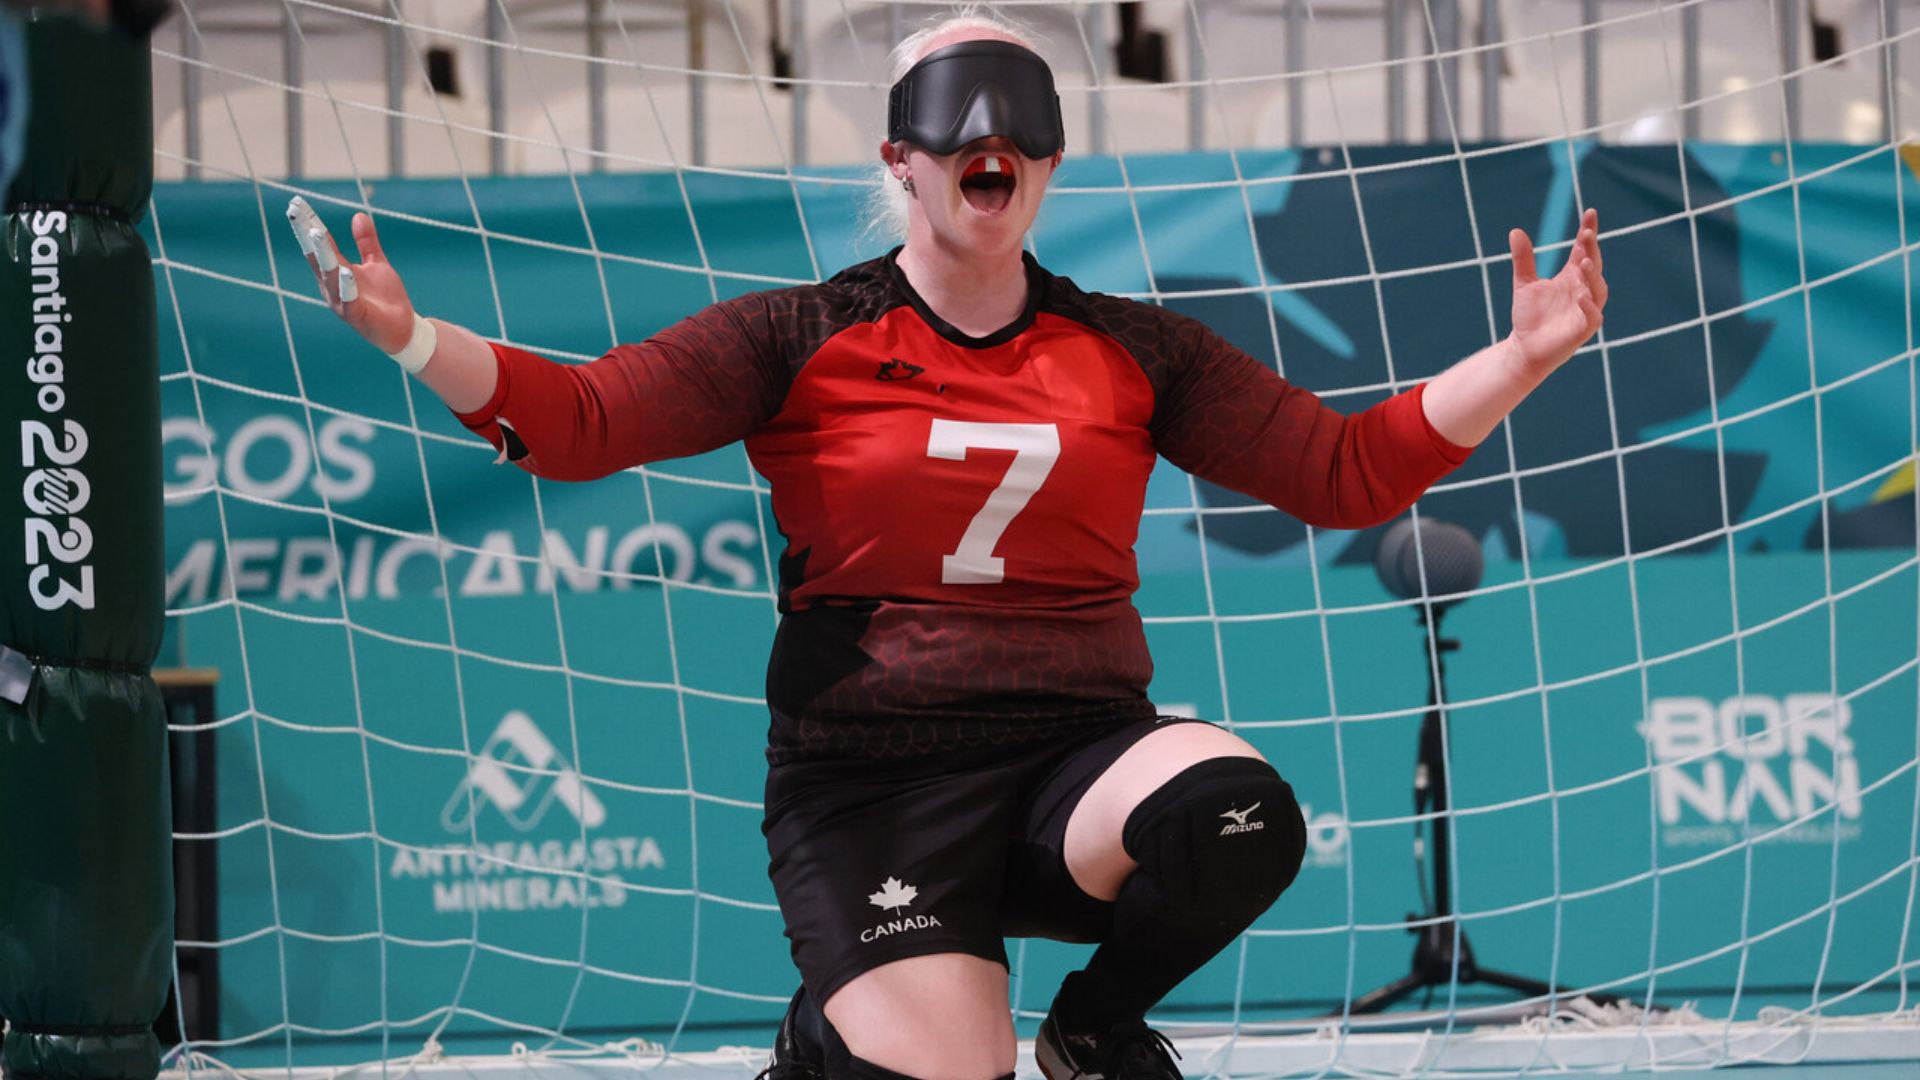 Goalball: Canada Achieves Major Victory, Advances to Female's Gold Medal